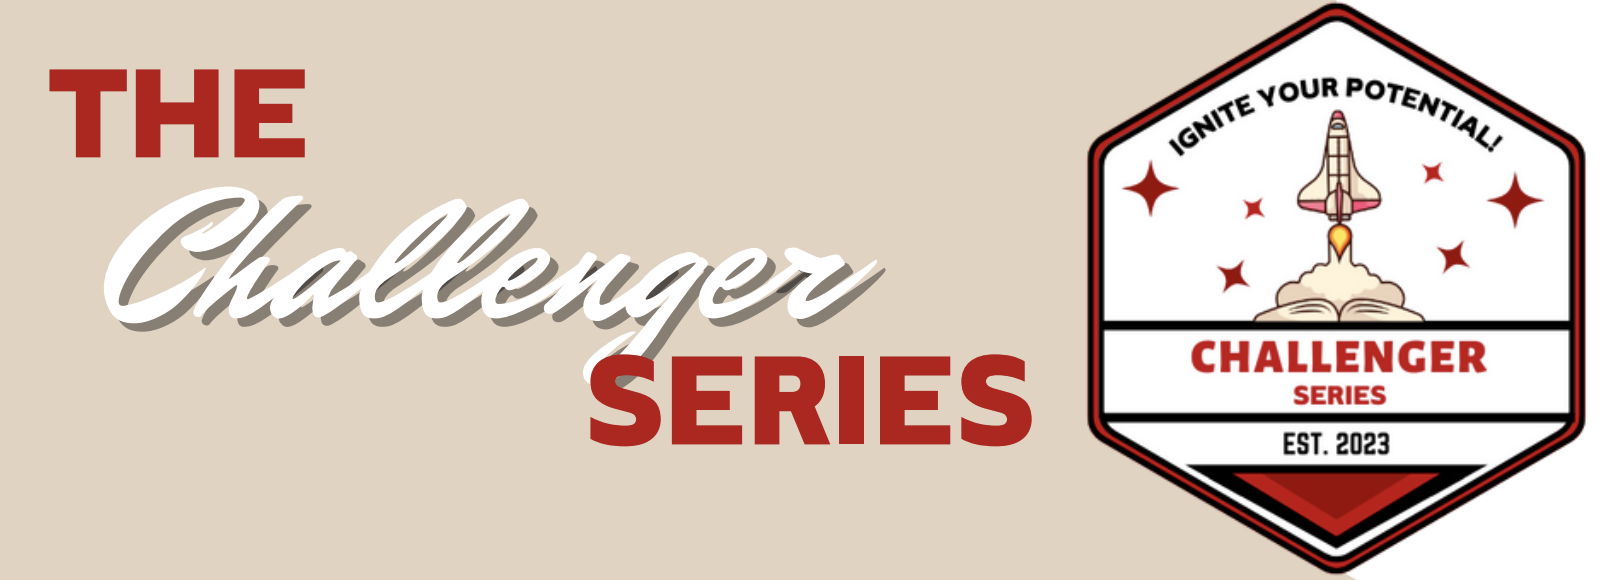 A banner which reads "The Challenger Series" in red and white text